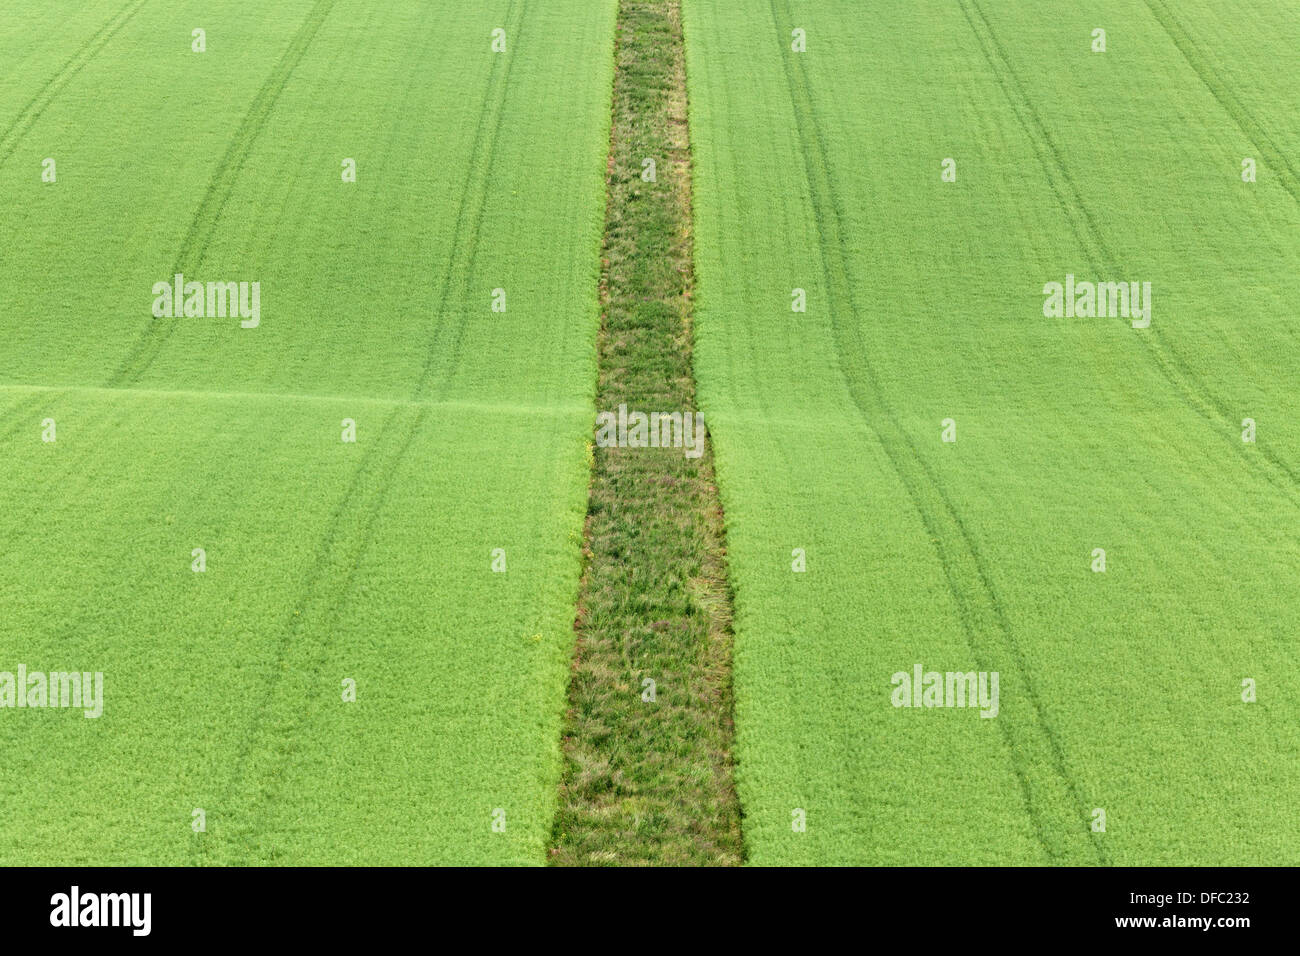 A strip of uncultivated land divides a rapeseed field in two halves Stock Photo